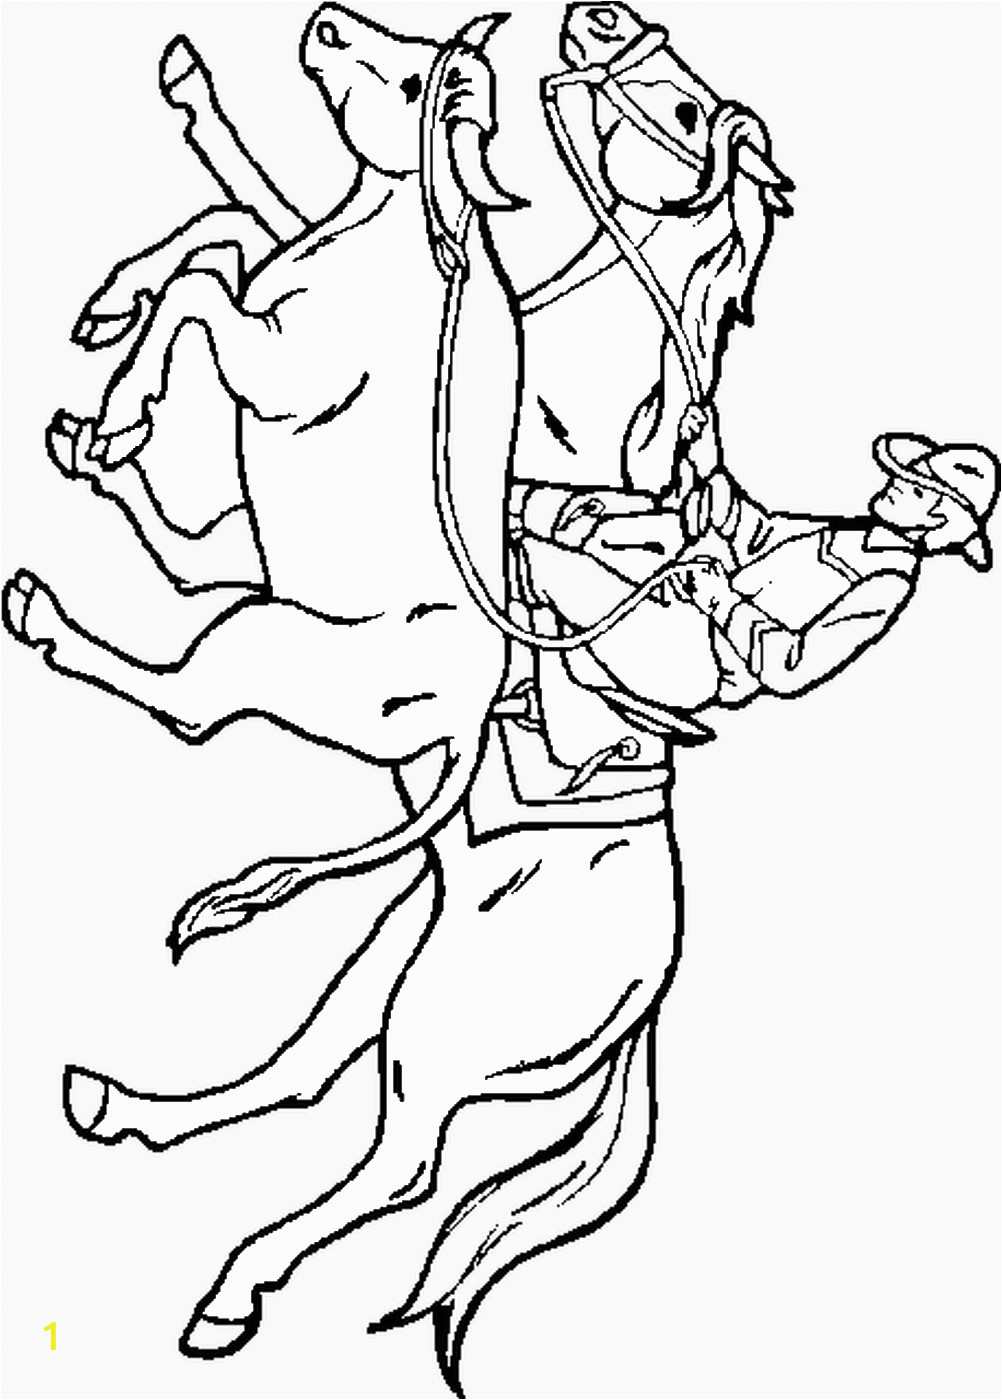 Cowboy Coloring Pages to Print Free Cowboy Coloring Pages